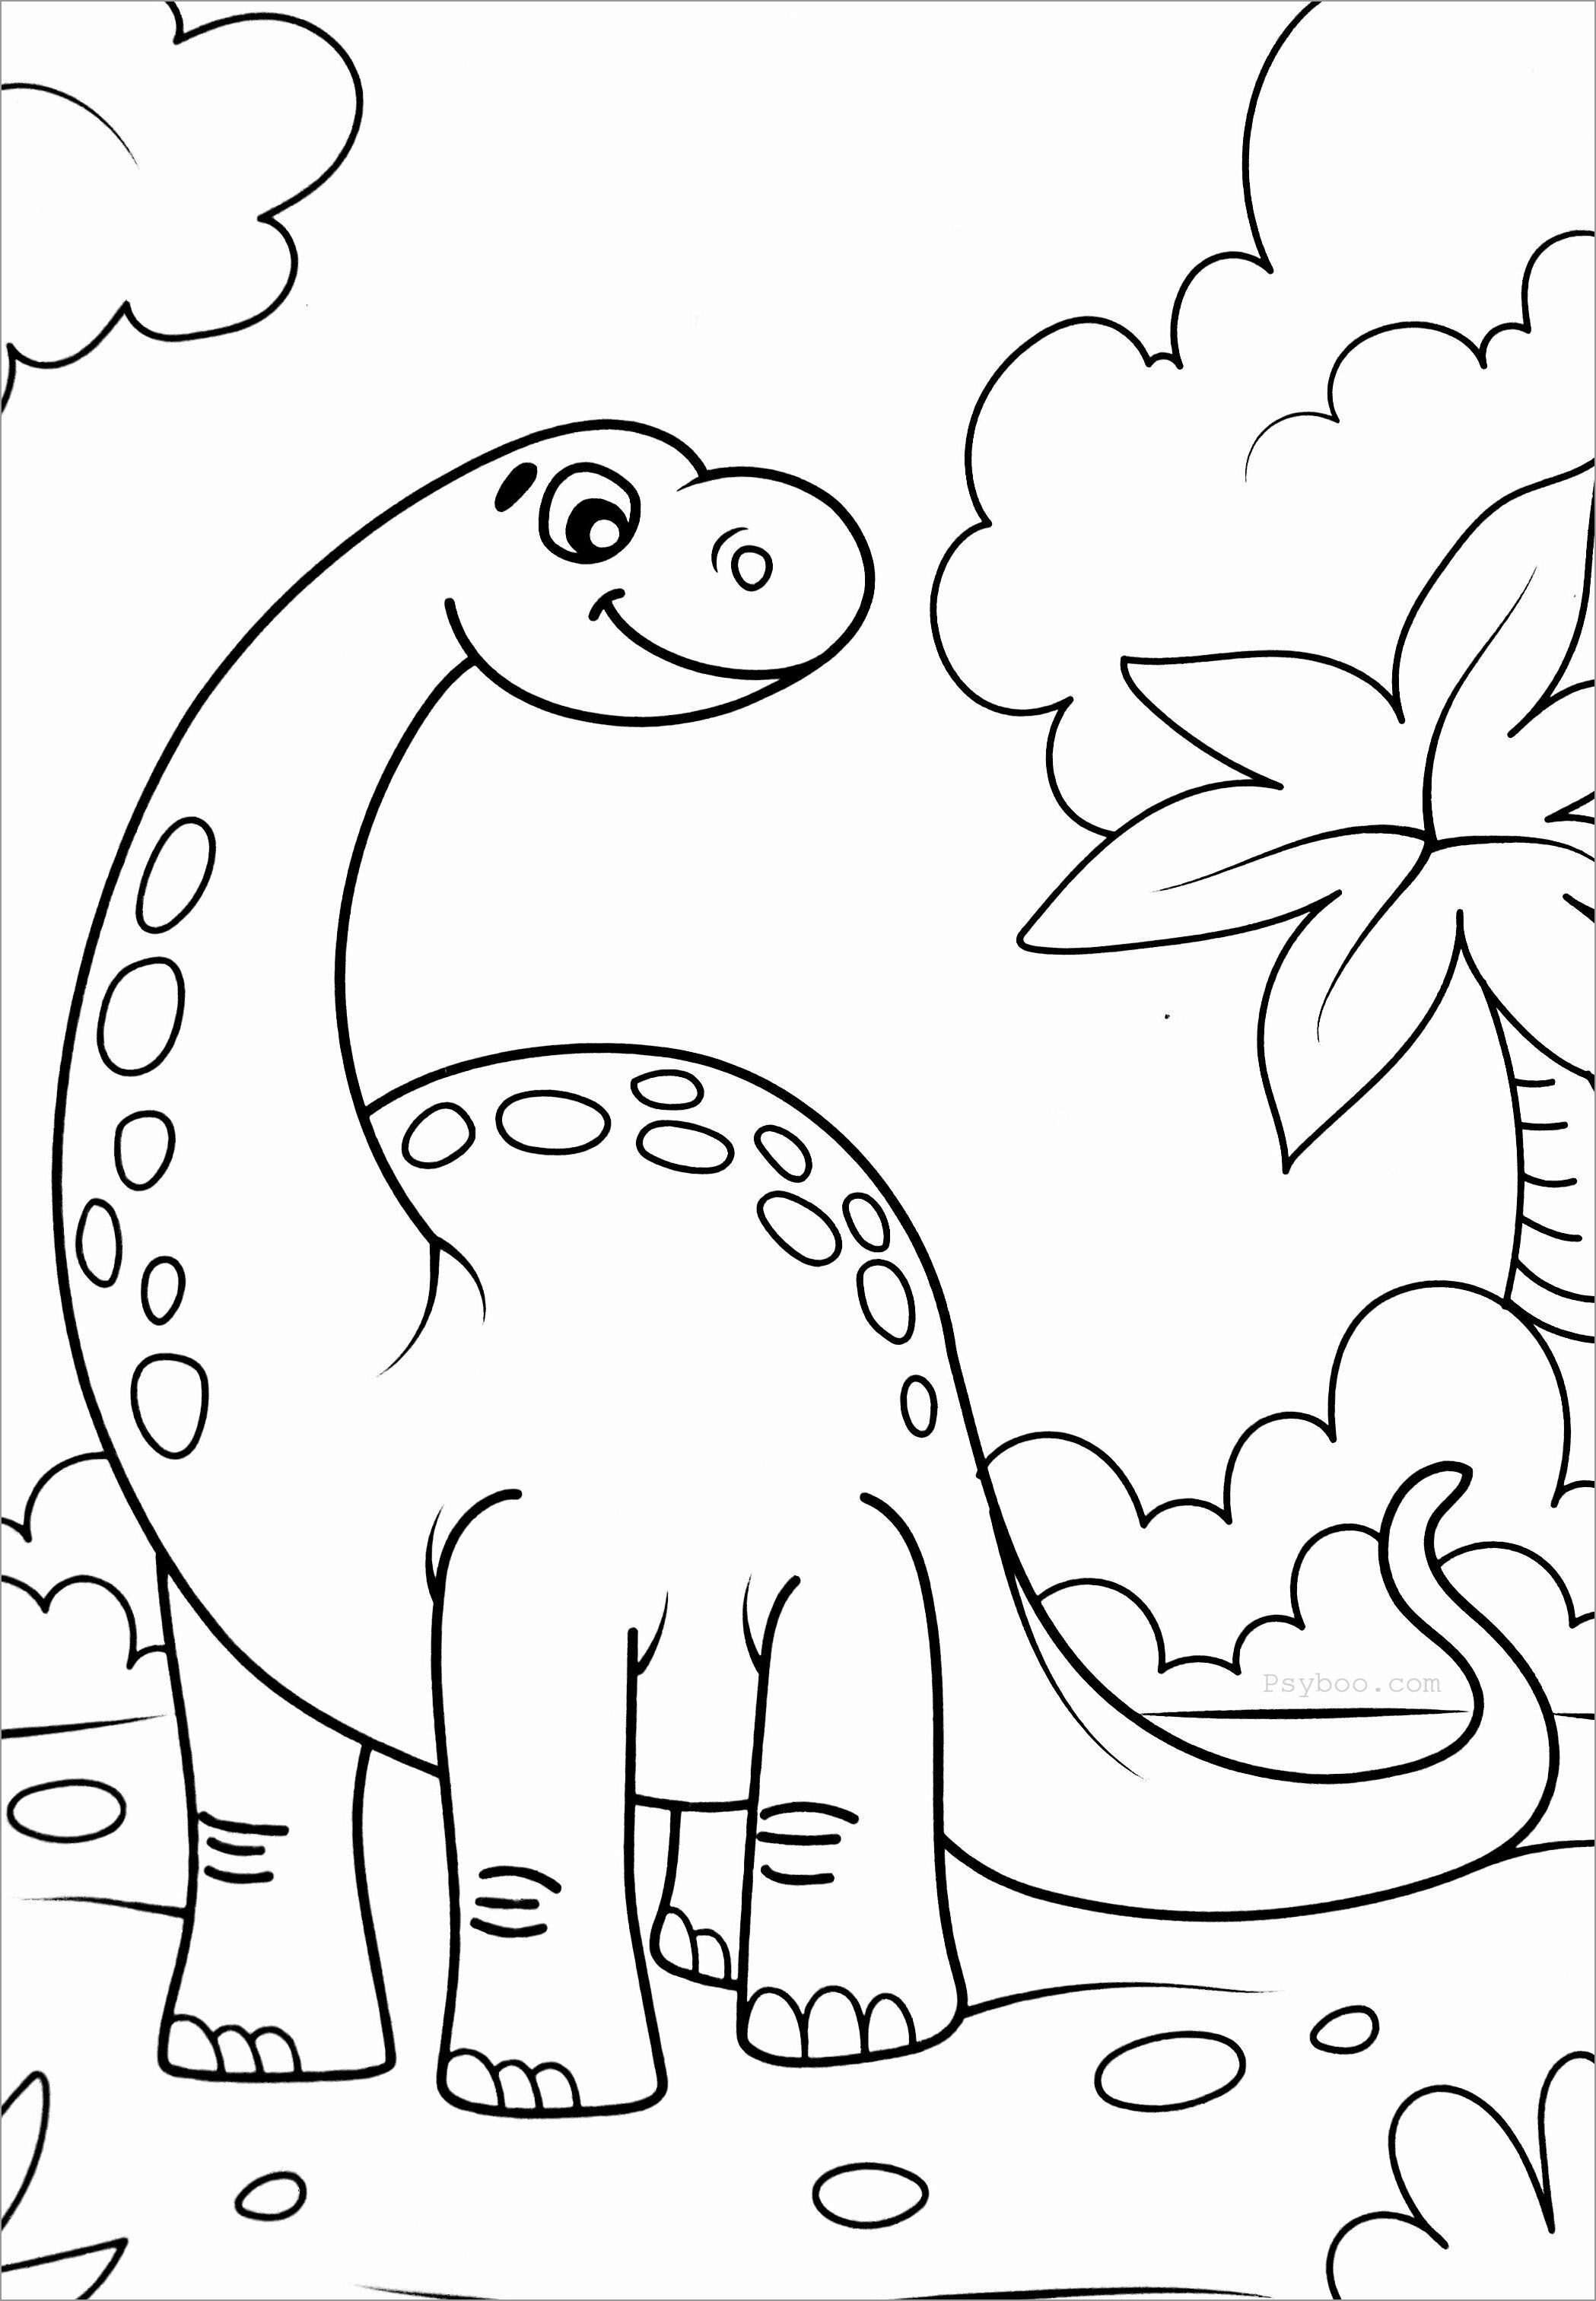 Dinosaur Coloring Pages for Kids   ColoringBay